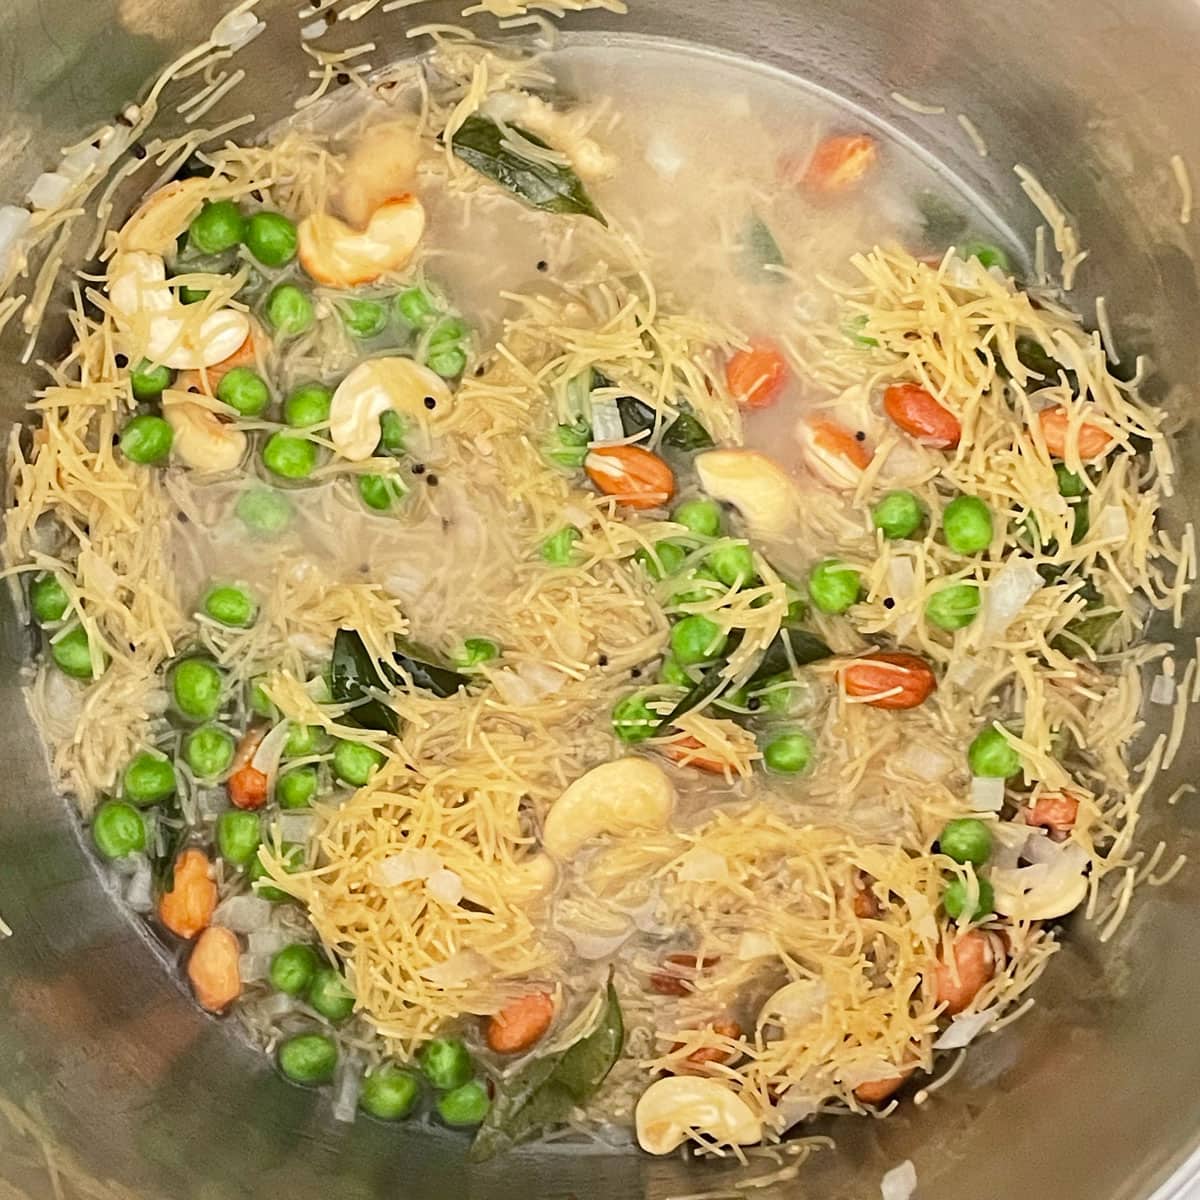 Sauted ingredients with water for Vermicelli Upma.